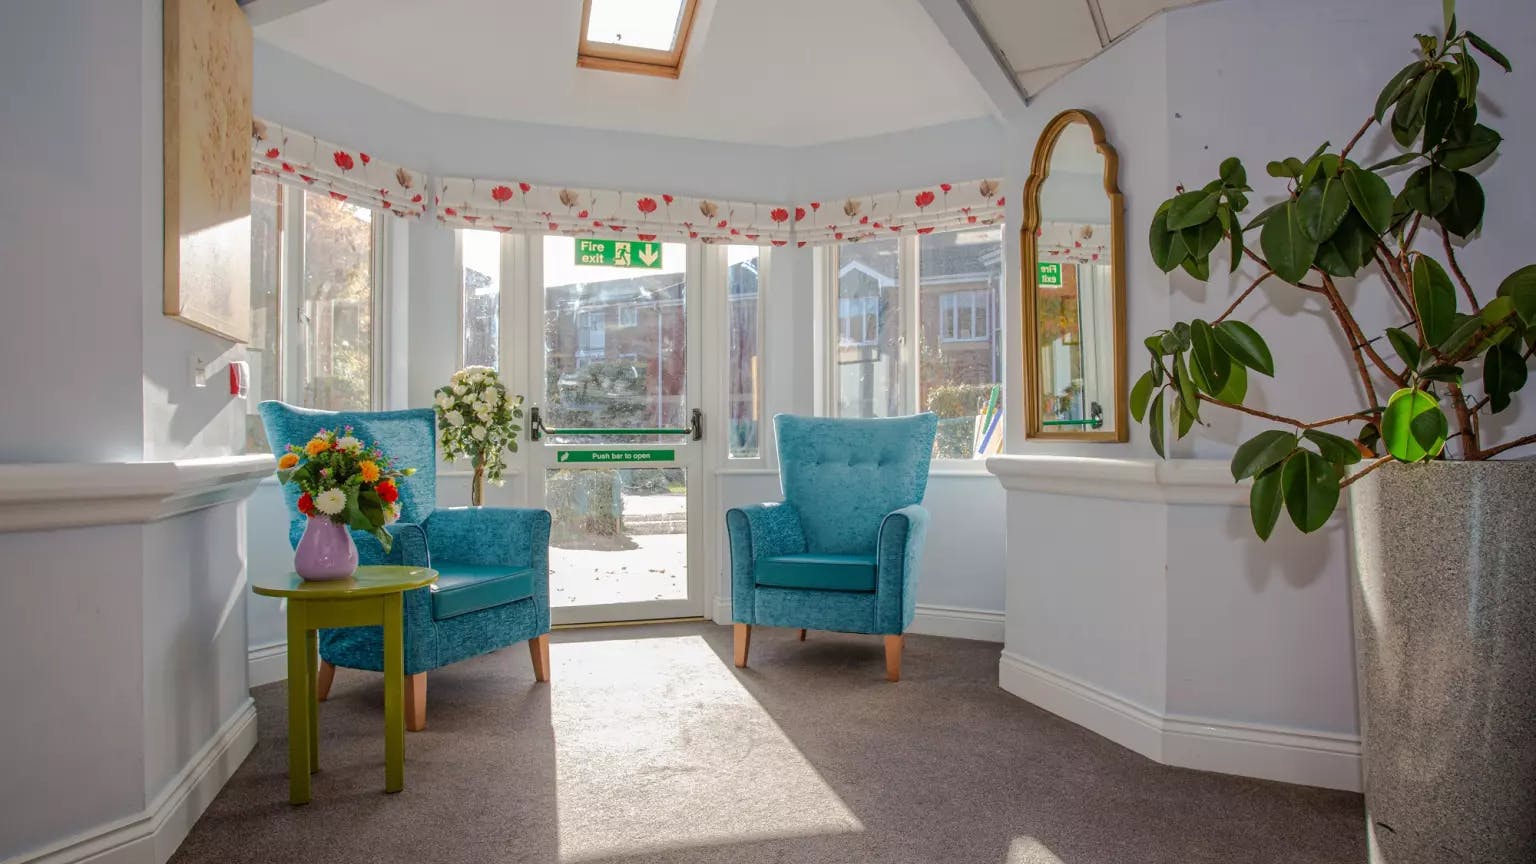 Lounge of Greenacres care home in Hatfield, Hertfordshire